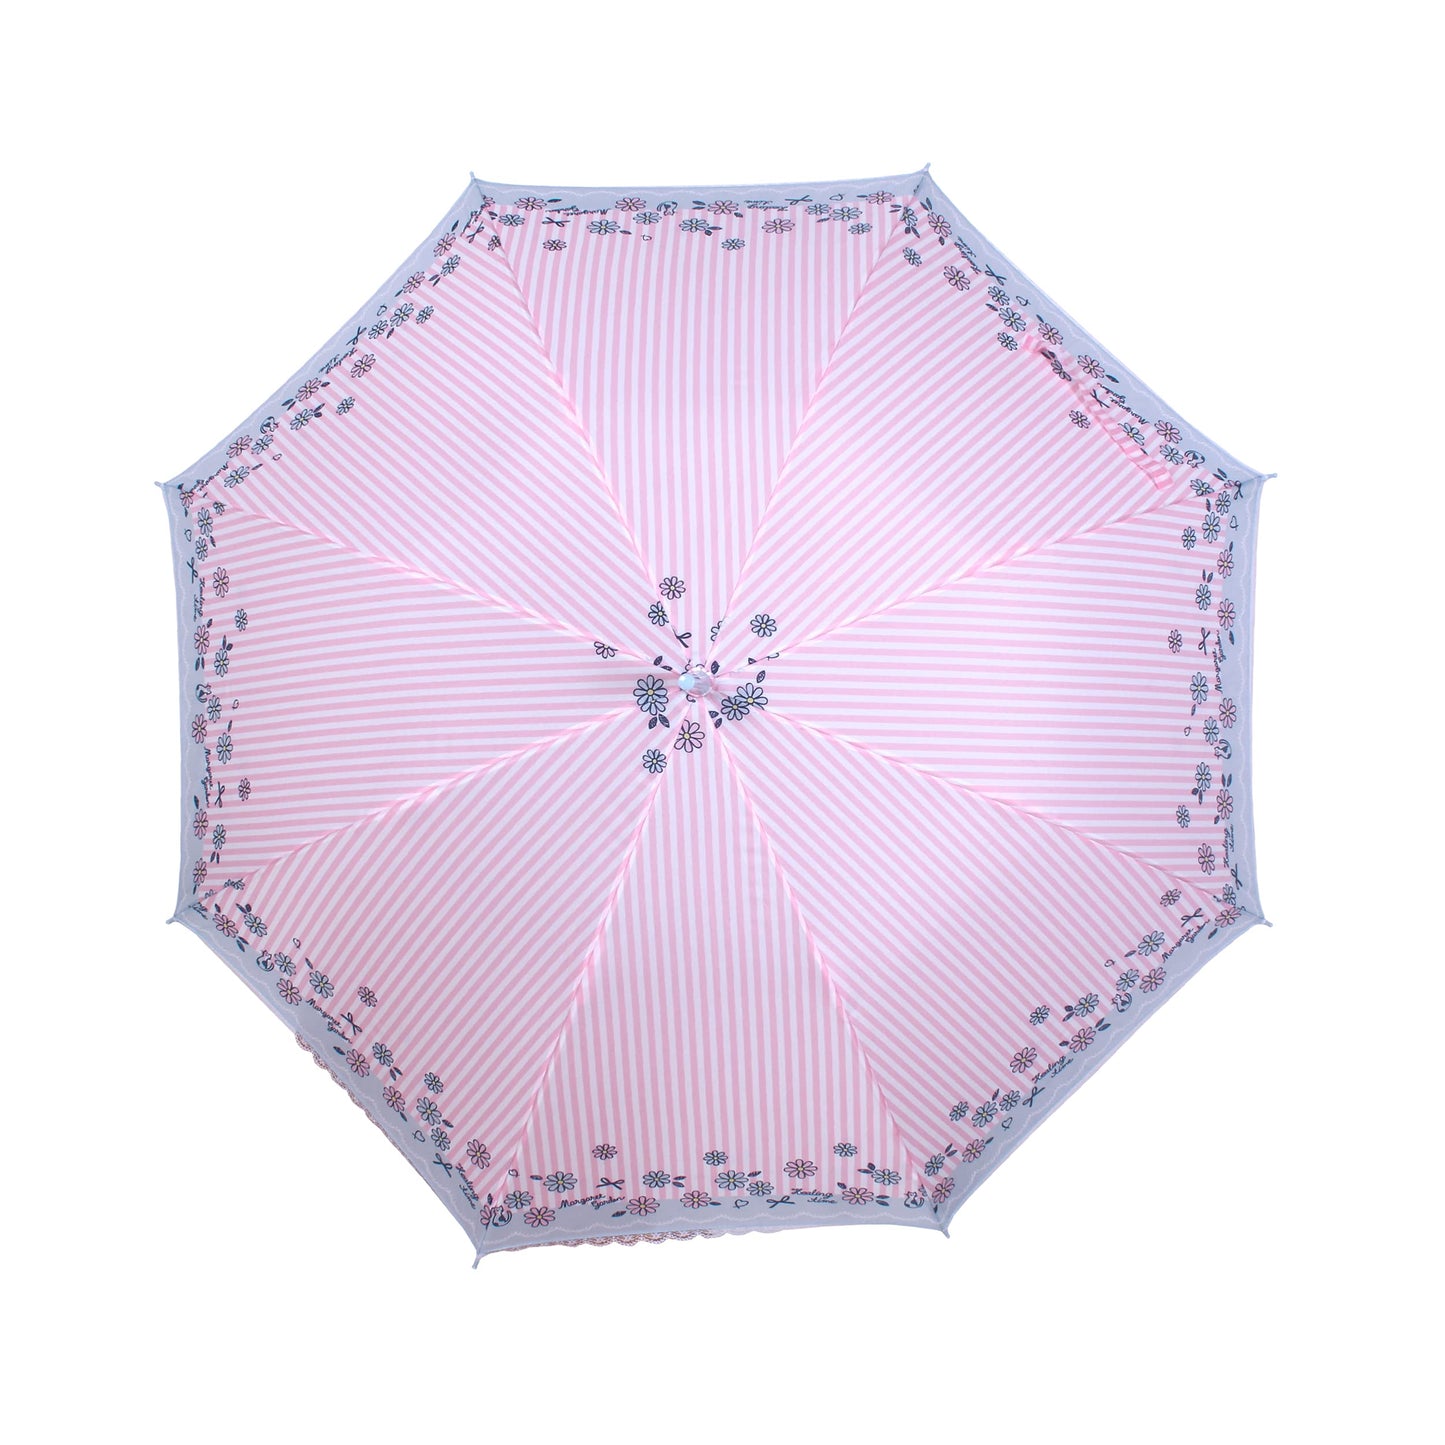 THE CLOWNFISH Umbrella 2 Fold Auto Open Waterproof Pongee Umbrellas For Men and Women (Stripe Design Laced Border- Baby Pink)